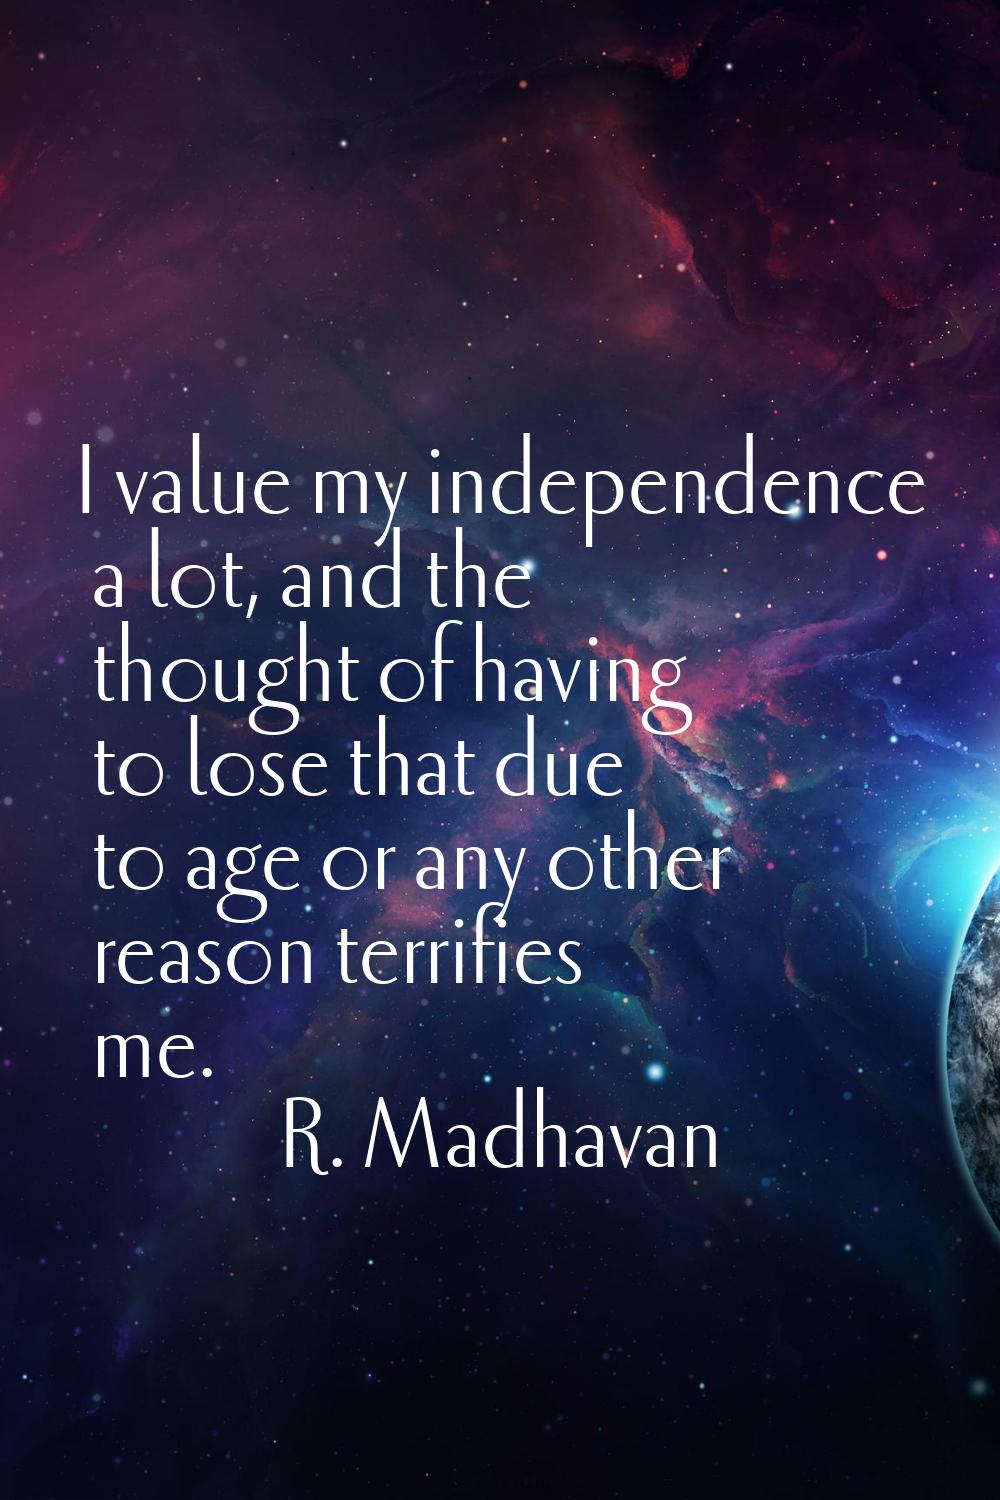 I value my independence a lot, and the thought of having to lose that due to age or any other reaso